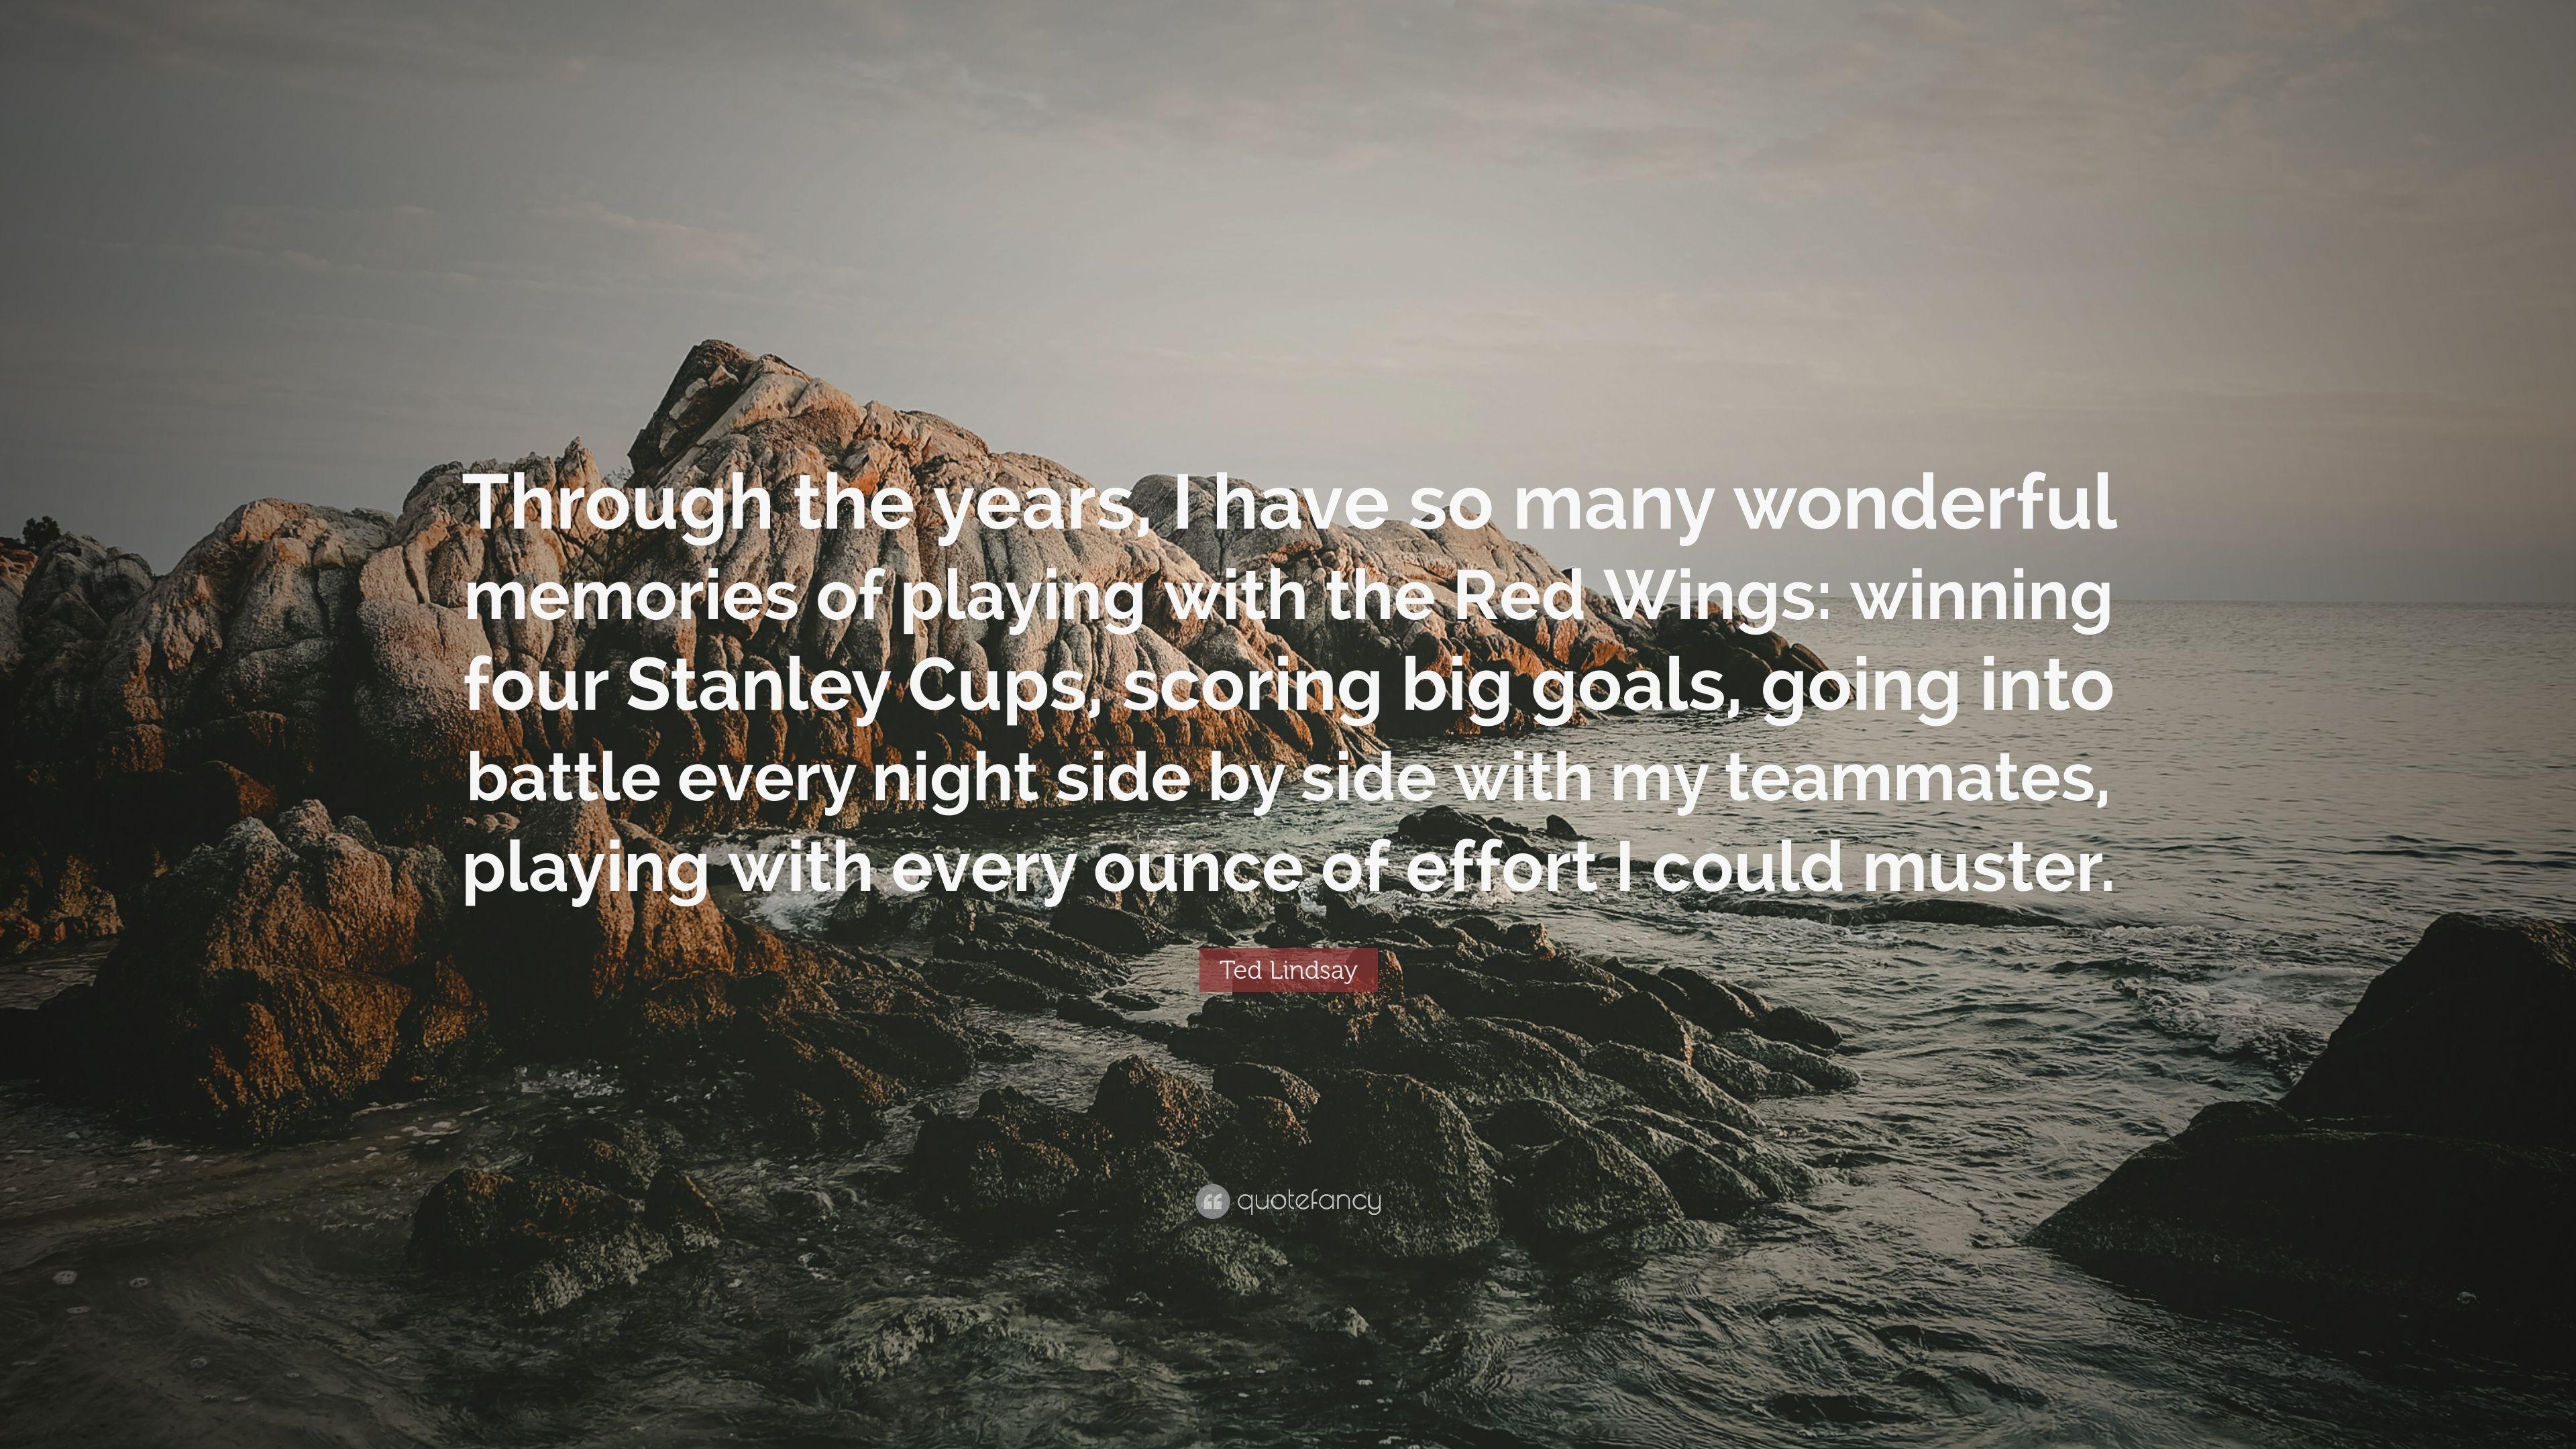 Ted Lindsay Quote: “Through the years, I have so many wonderful